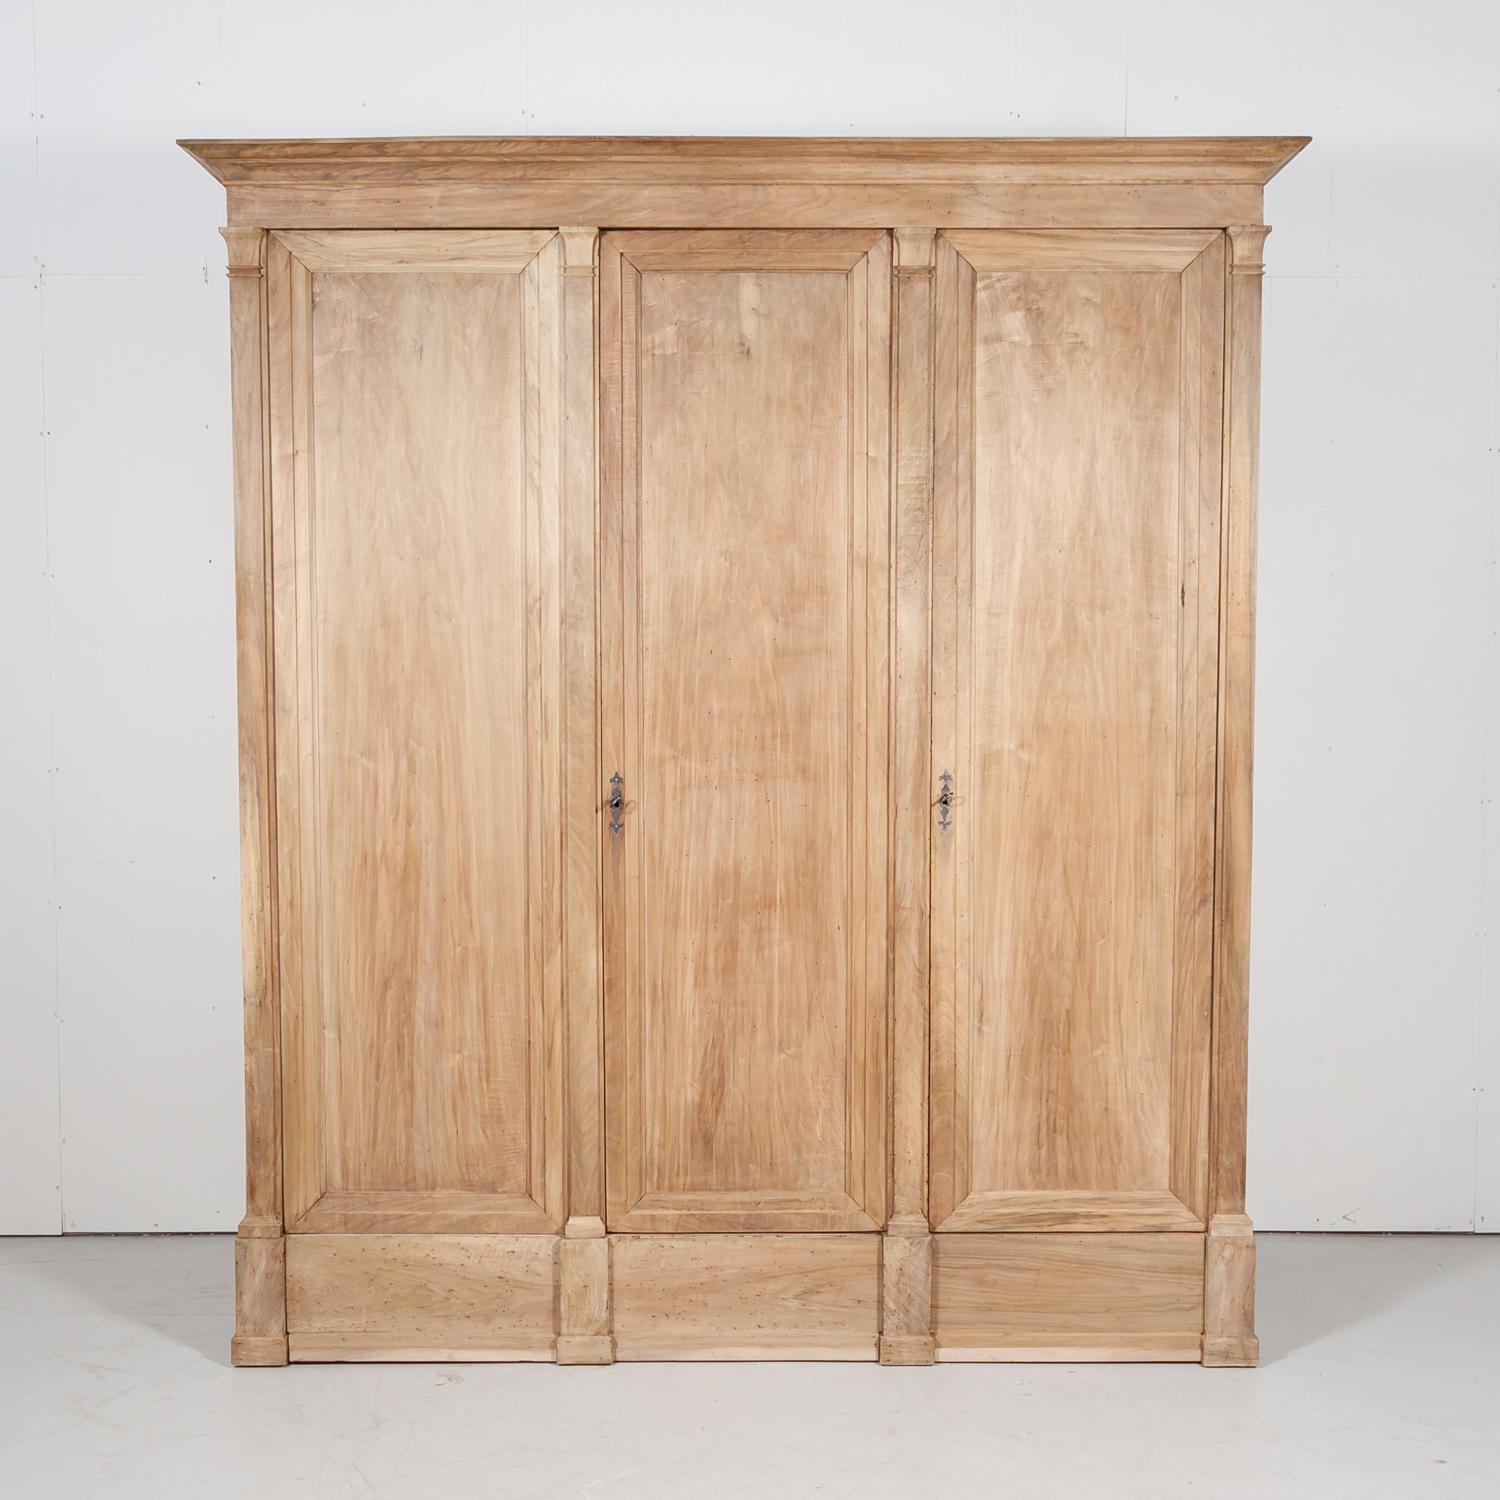 Monumental 18th century French Directoire period placard or wardrobe handcrafted of solid walnut by skilled artisans in the South of France near Arles, circa 1780s. custom made for a country chateau, this walnut placard has been bleached or washed